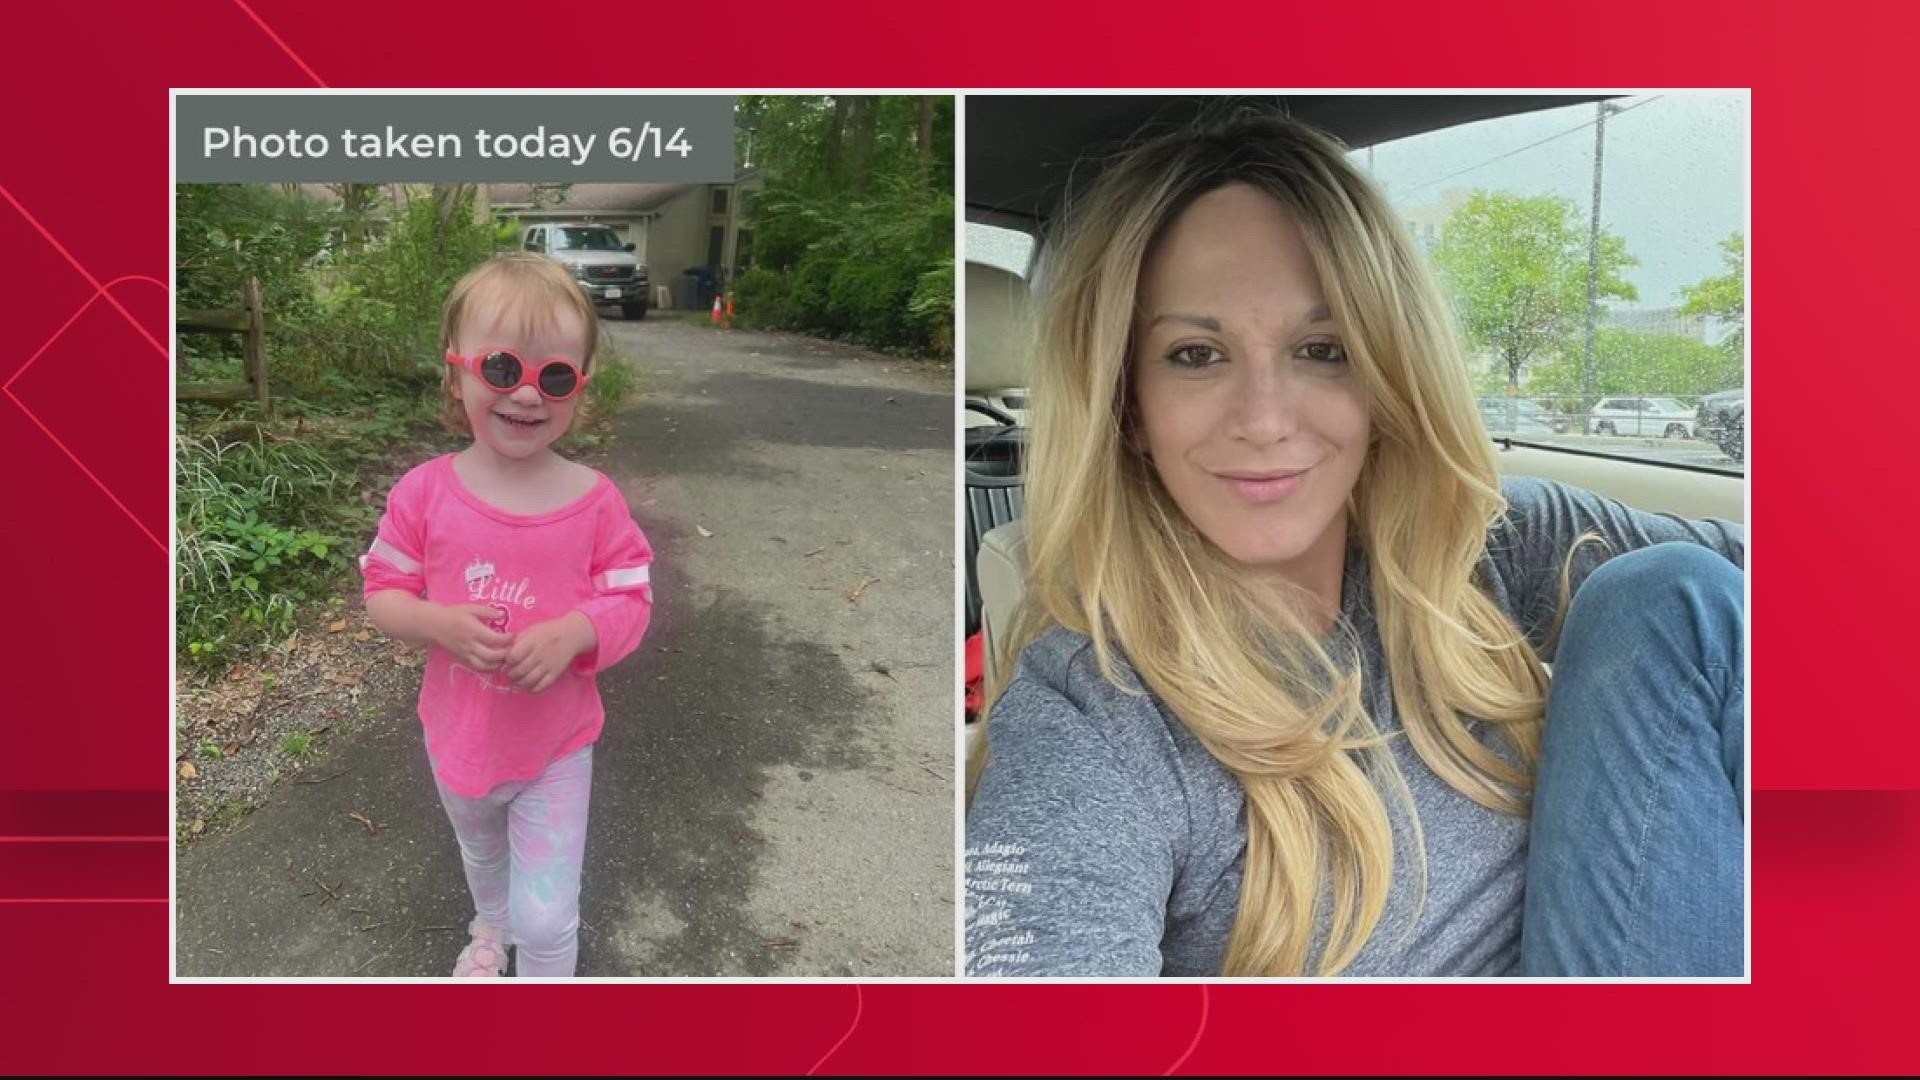 Officers say Amelia was taken by her mother, 35-year-old Catherine Kraus. Catherine is known to wear wigs or may be bald.